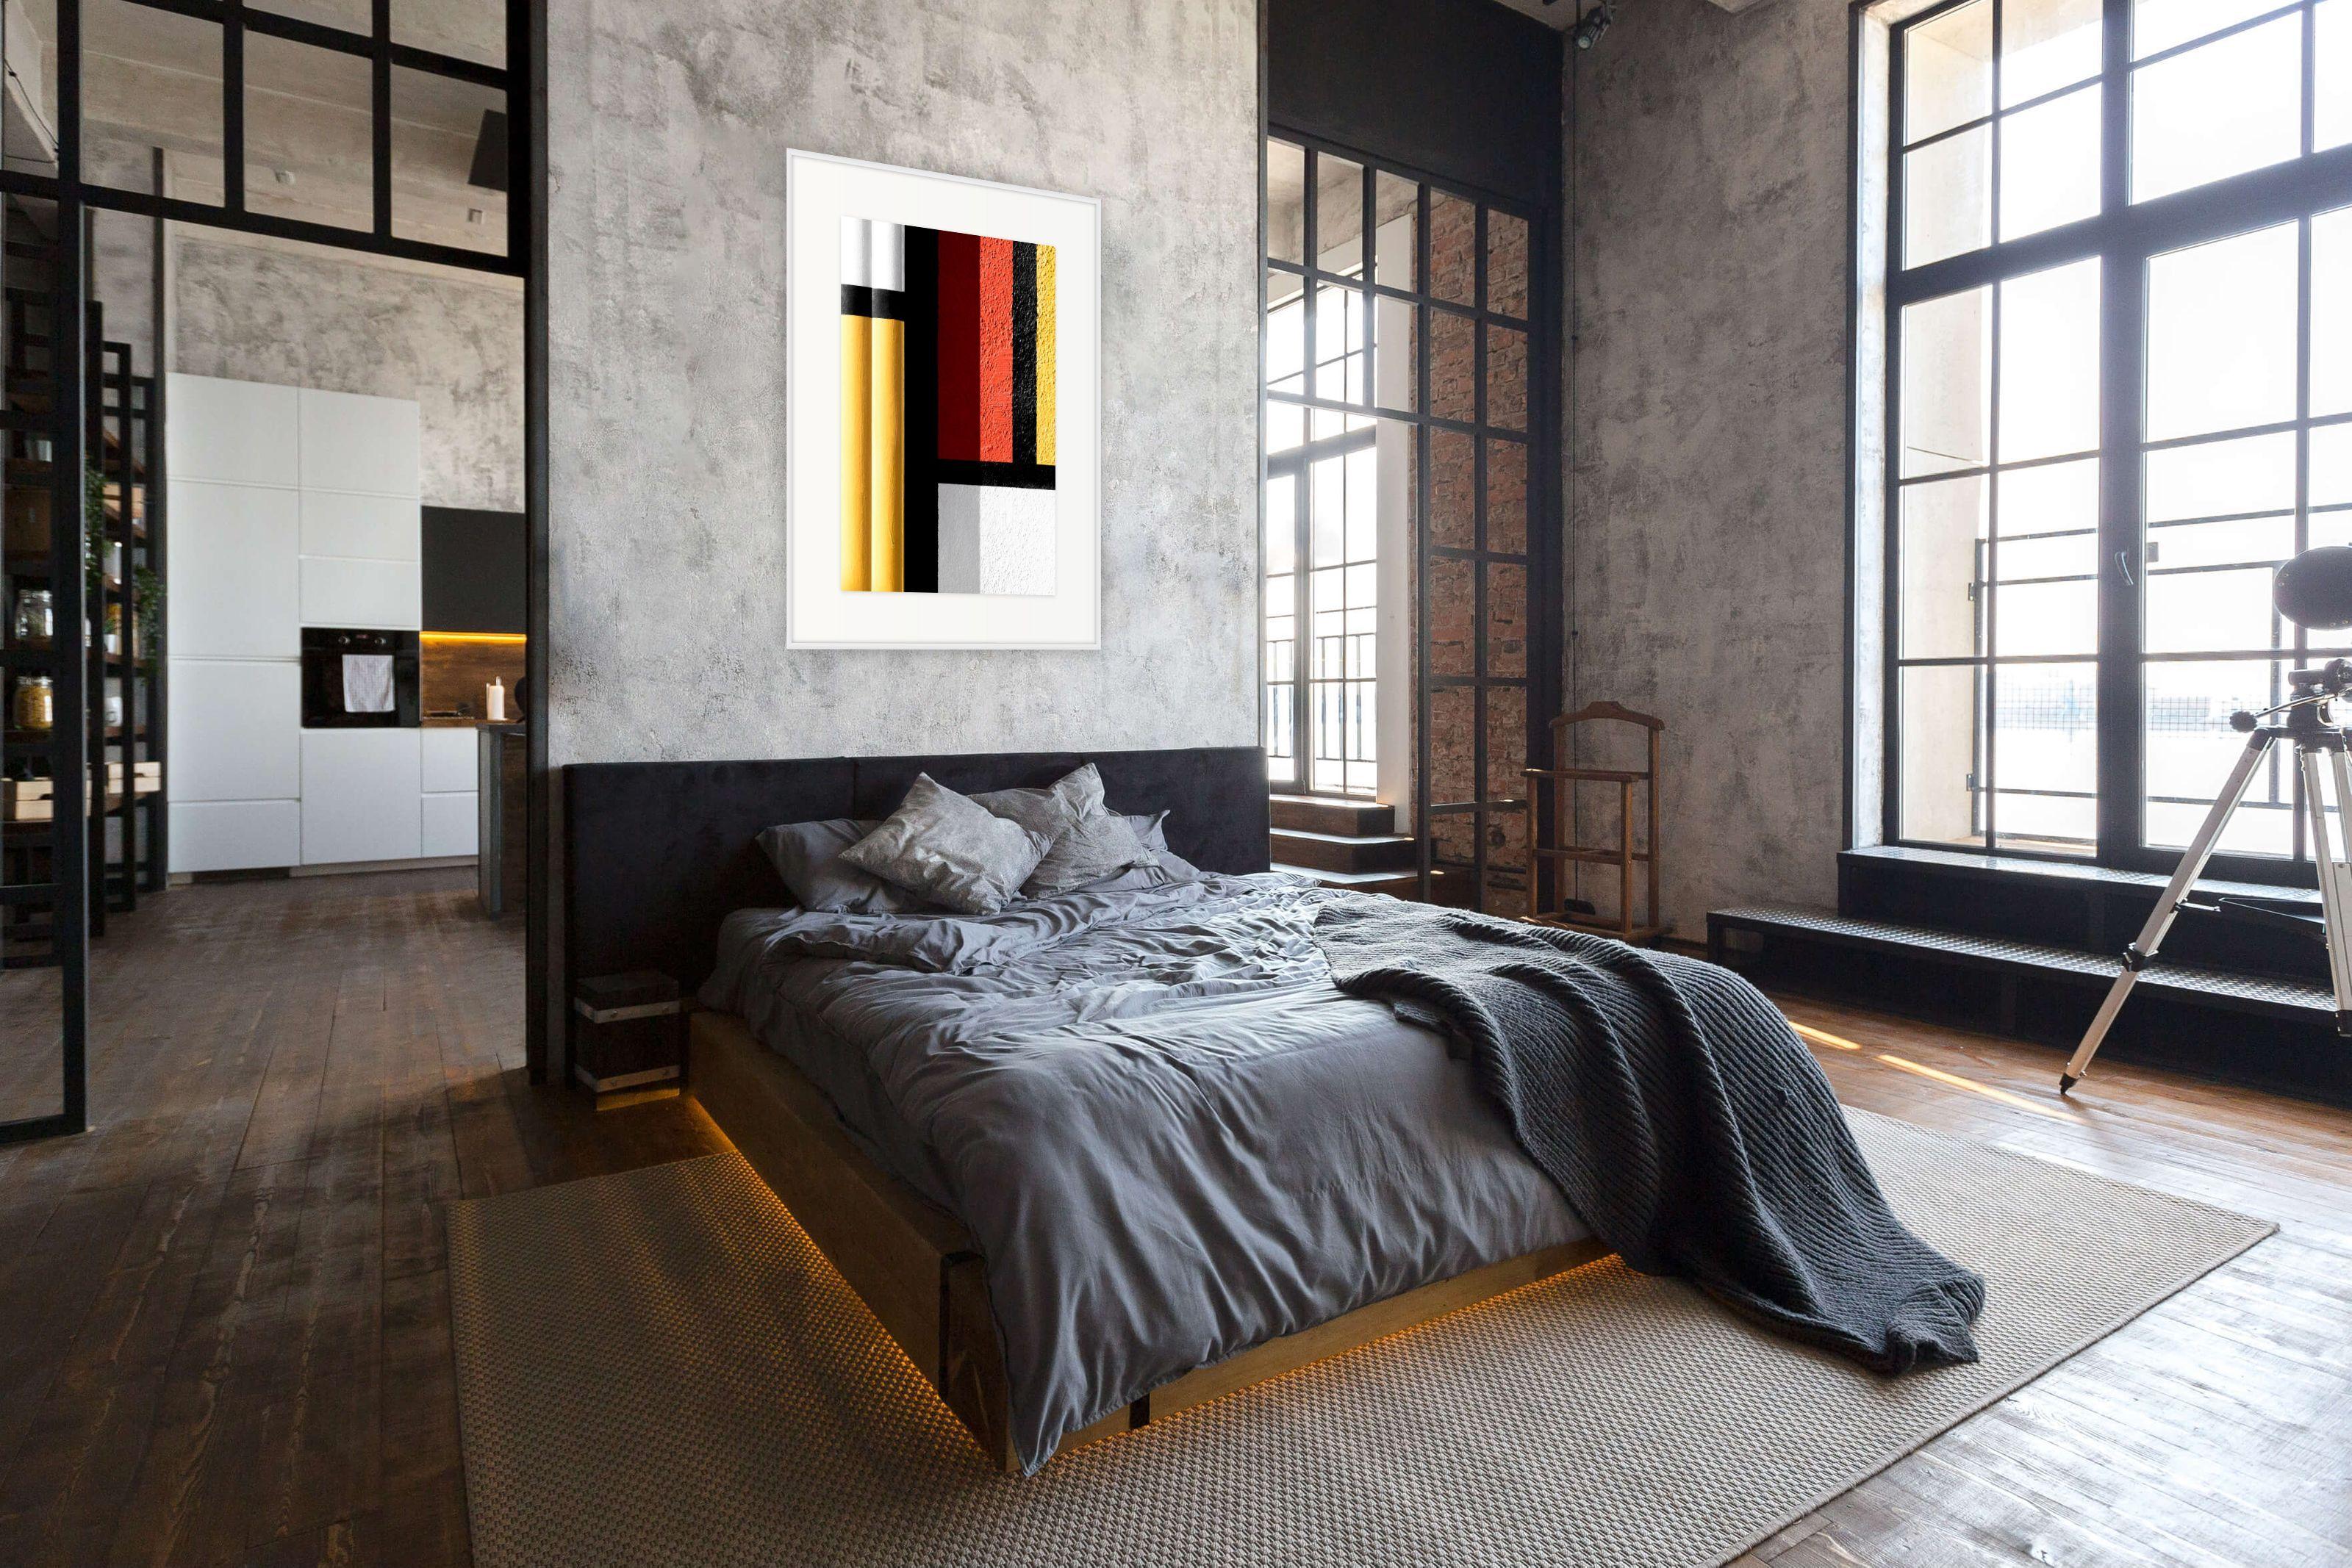 Philly Mondrian 2 - focuses on lines in urban landscape, red, yellow, black - Photorealist Photograph by Jon Setter